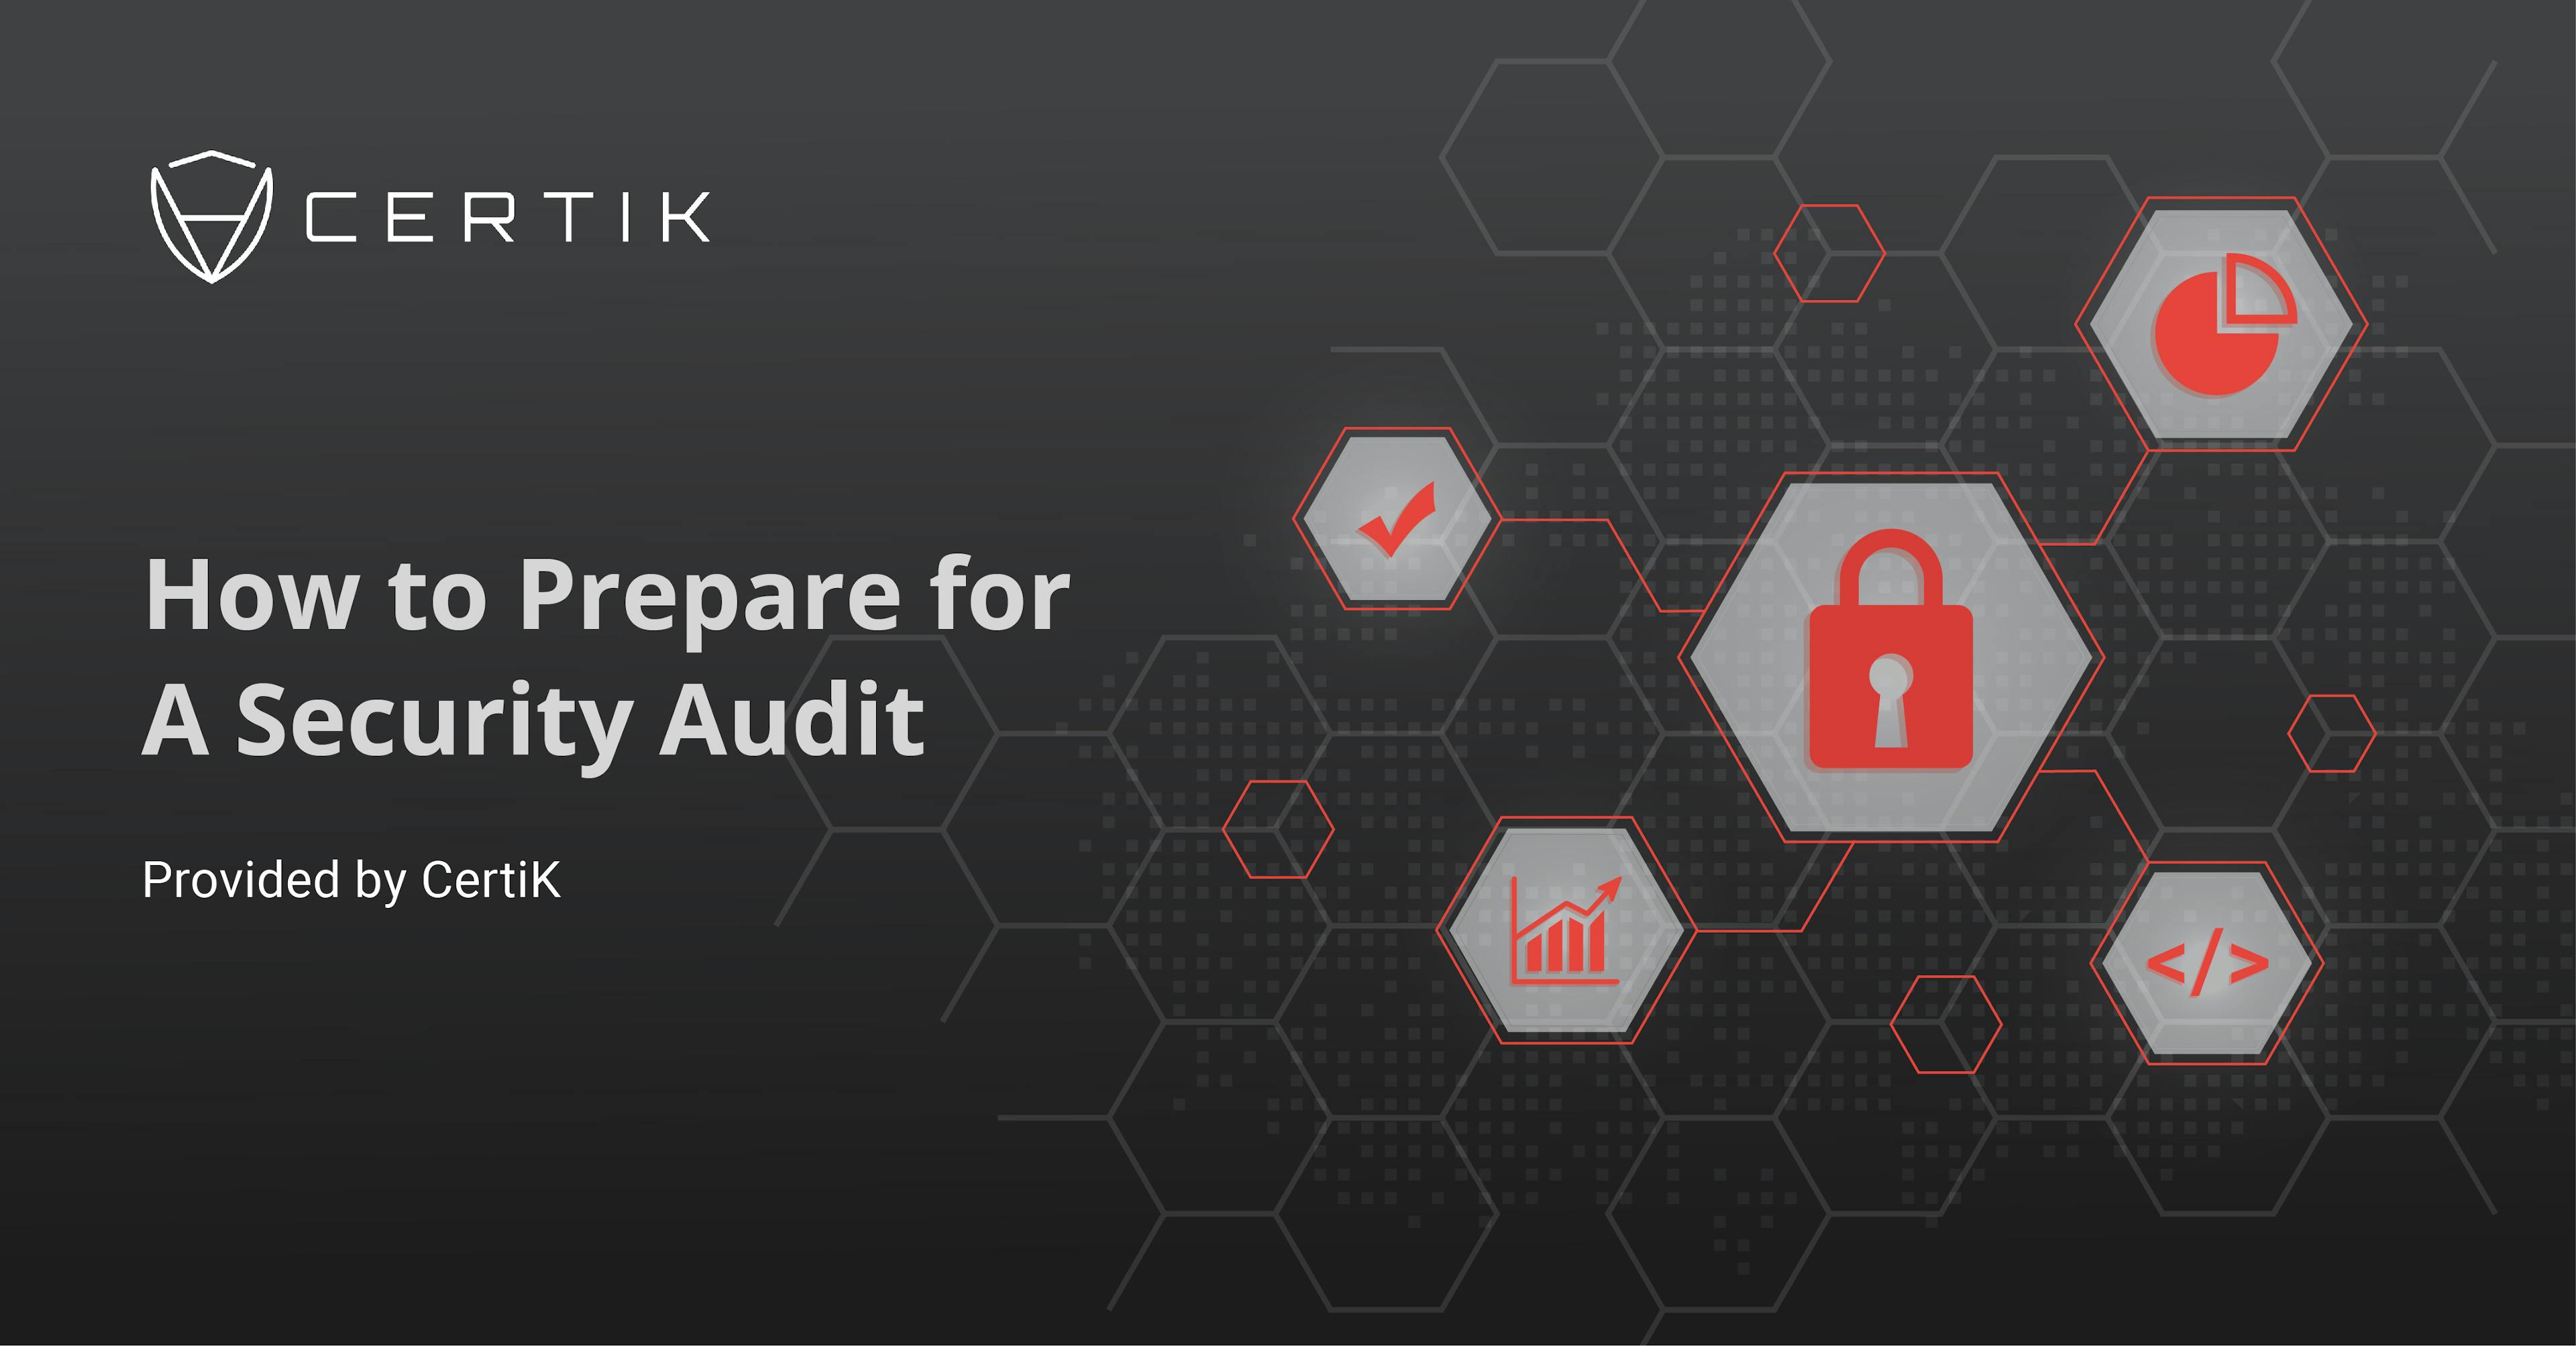 How to Prepare for a Security Audit